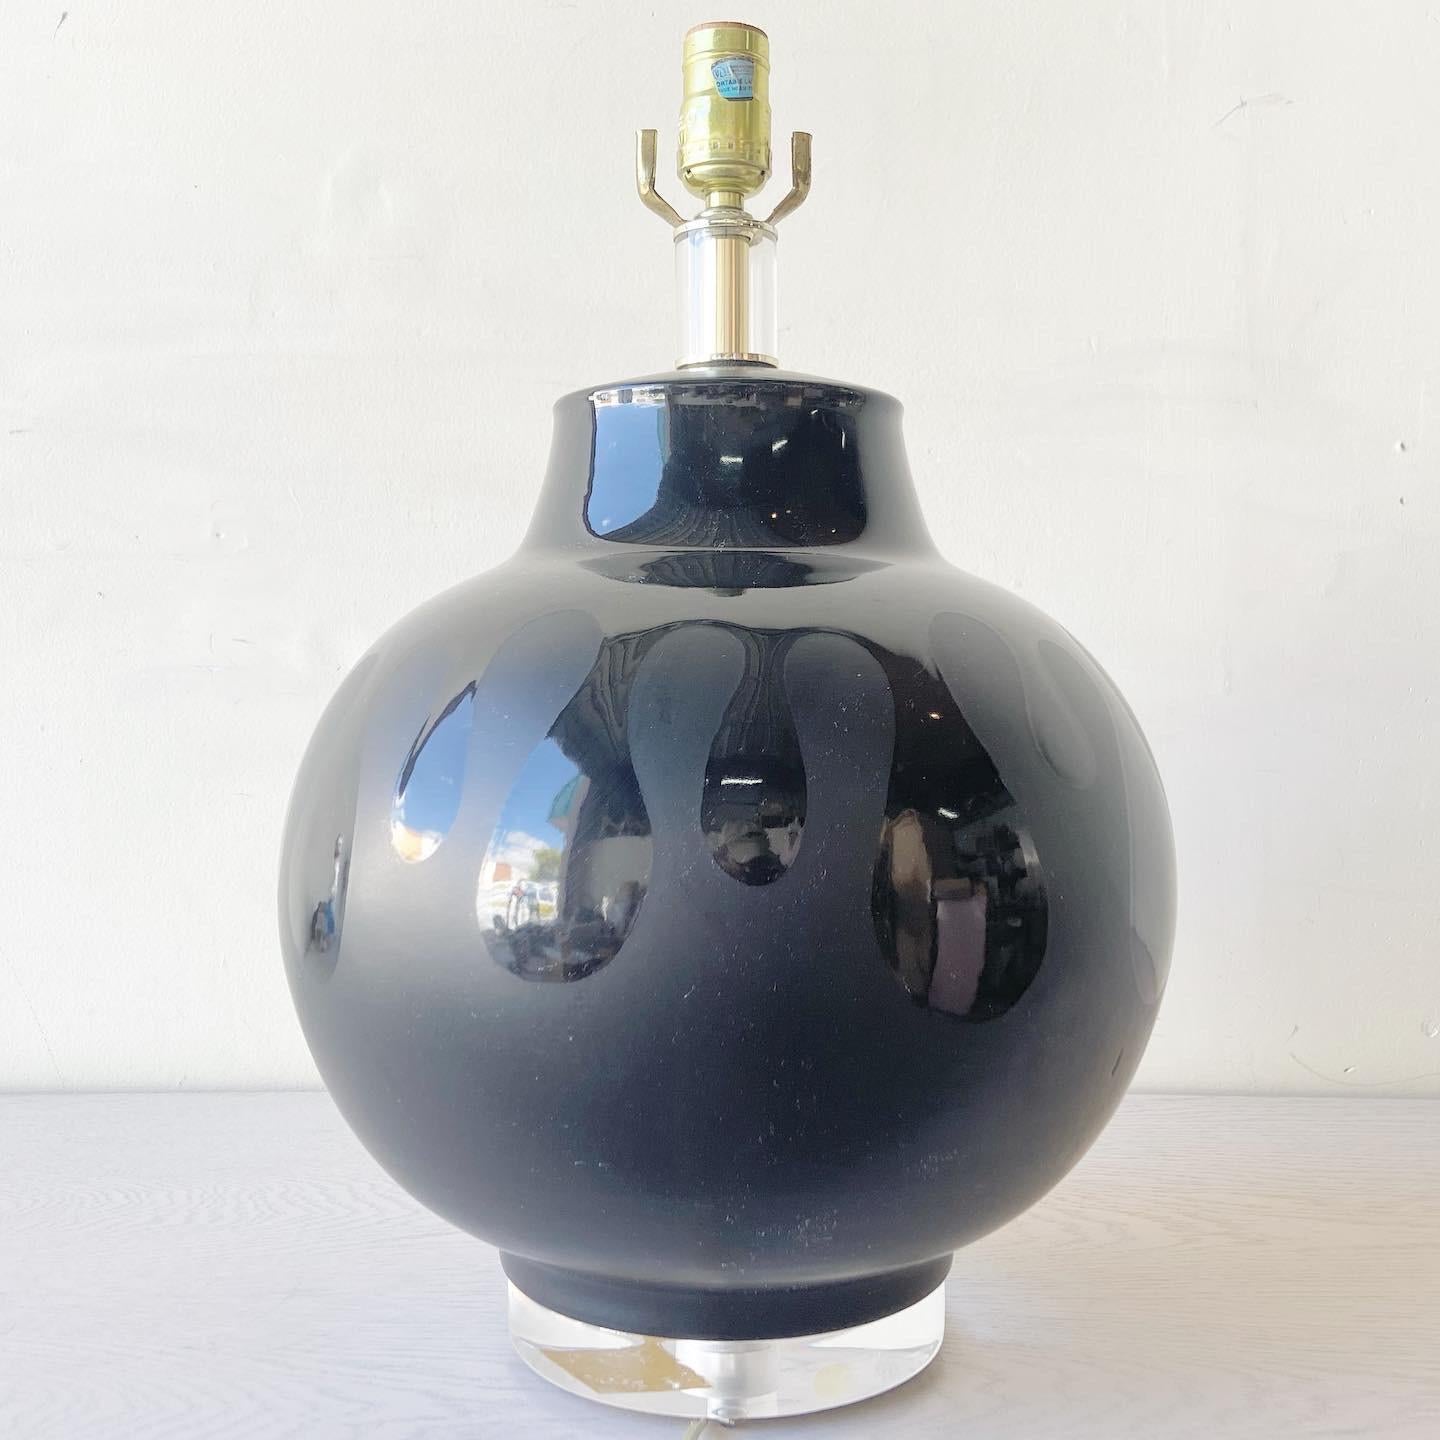 Incredible ceramic table lamp. Features a black design which bring together a a gloss and matte finish.

Additional information:
Material: Ceramic, Lucite
Color: Black, Transparent
Style: Postmodern
Time Period: 1980s
Place of origin: